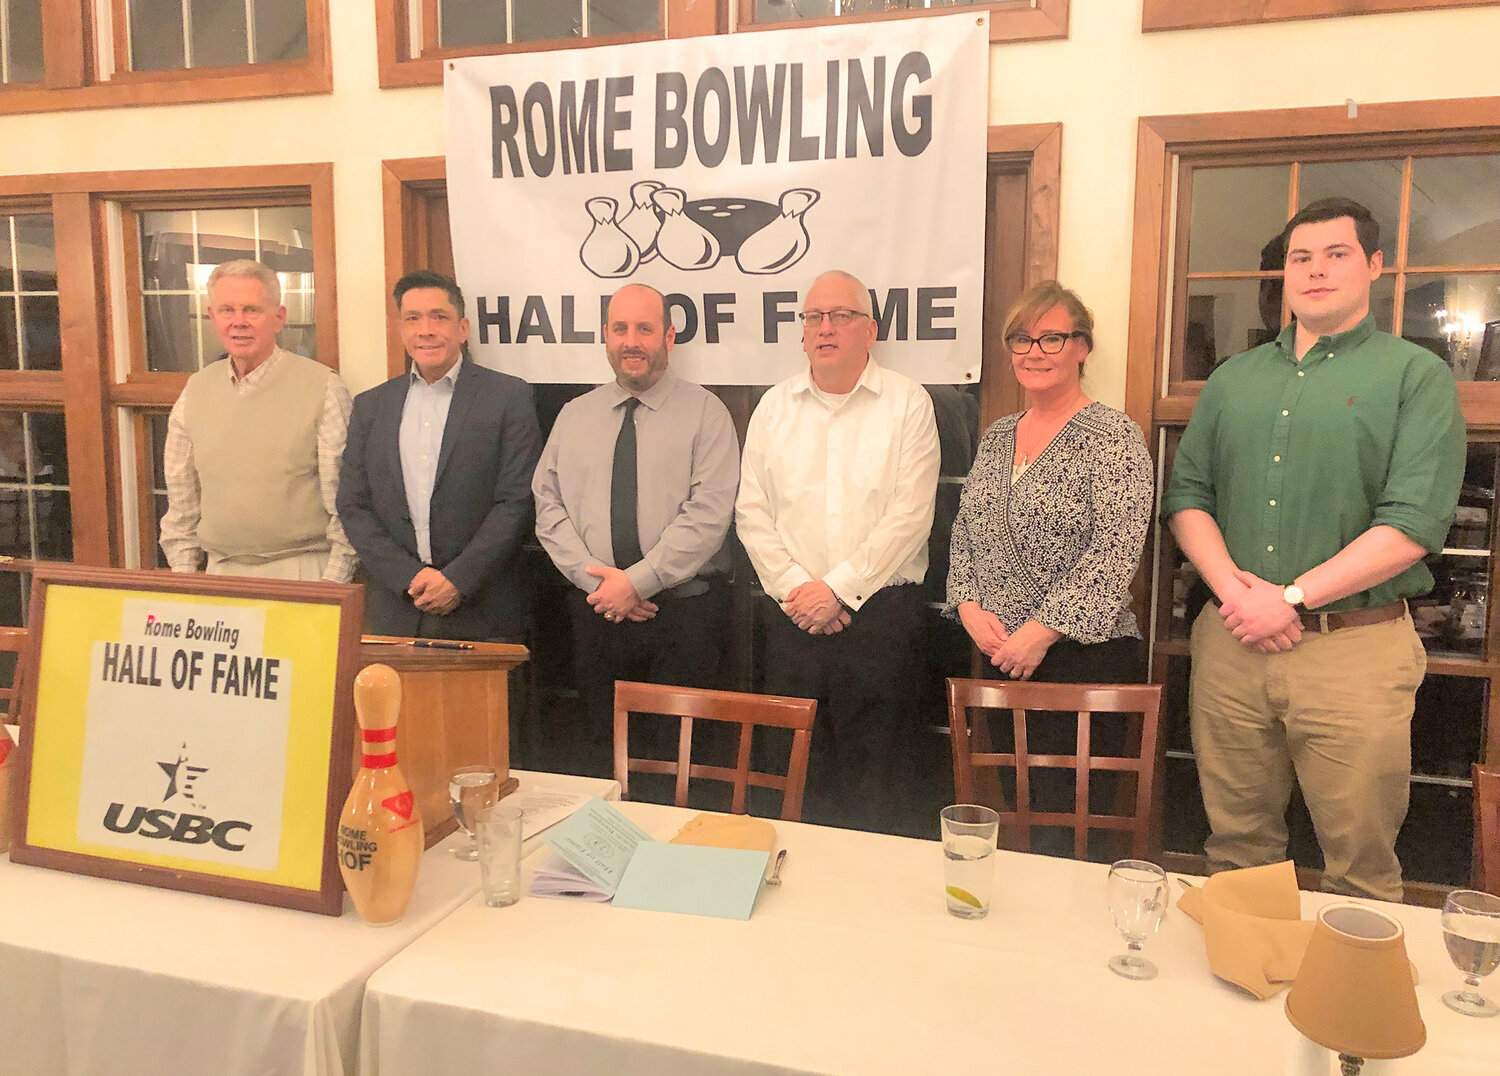 2023 ROME BOWLING HOF INDUCTEES — The Rome Bowling Hall of Fame held its annual induction ceremony on Saturday night at Teugega Country Club. This year’s inductees were Vie Evans, the late Julie Hooks, Michael Ferlo Jr. and the late Bradley Ruble. Pictured from left are Crispin Hooks, husband of Julie Hooks; Dennis Hooks, son of Julie Hooks; Mike Ferlo Jr.; Mark Rundle, brother of Brad Ruble; Christie Evans, daughter-in-law of Vie Evans and Conrad Evans, grandson of Vie Evans.